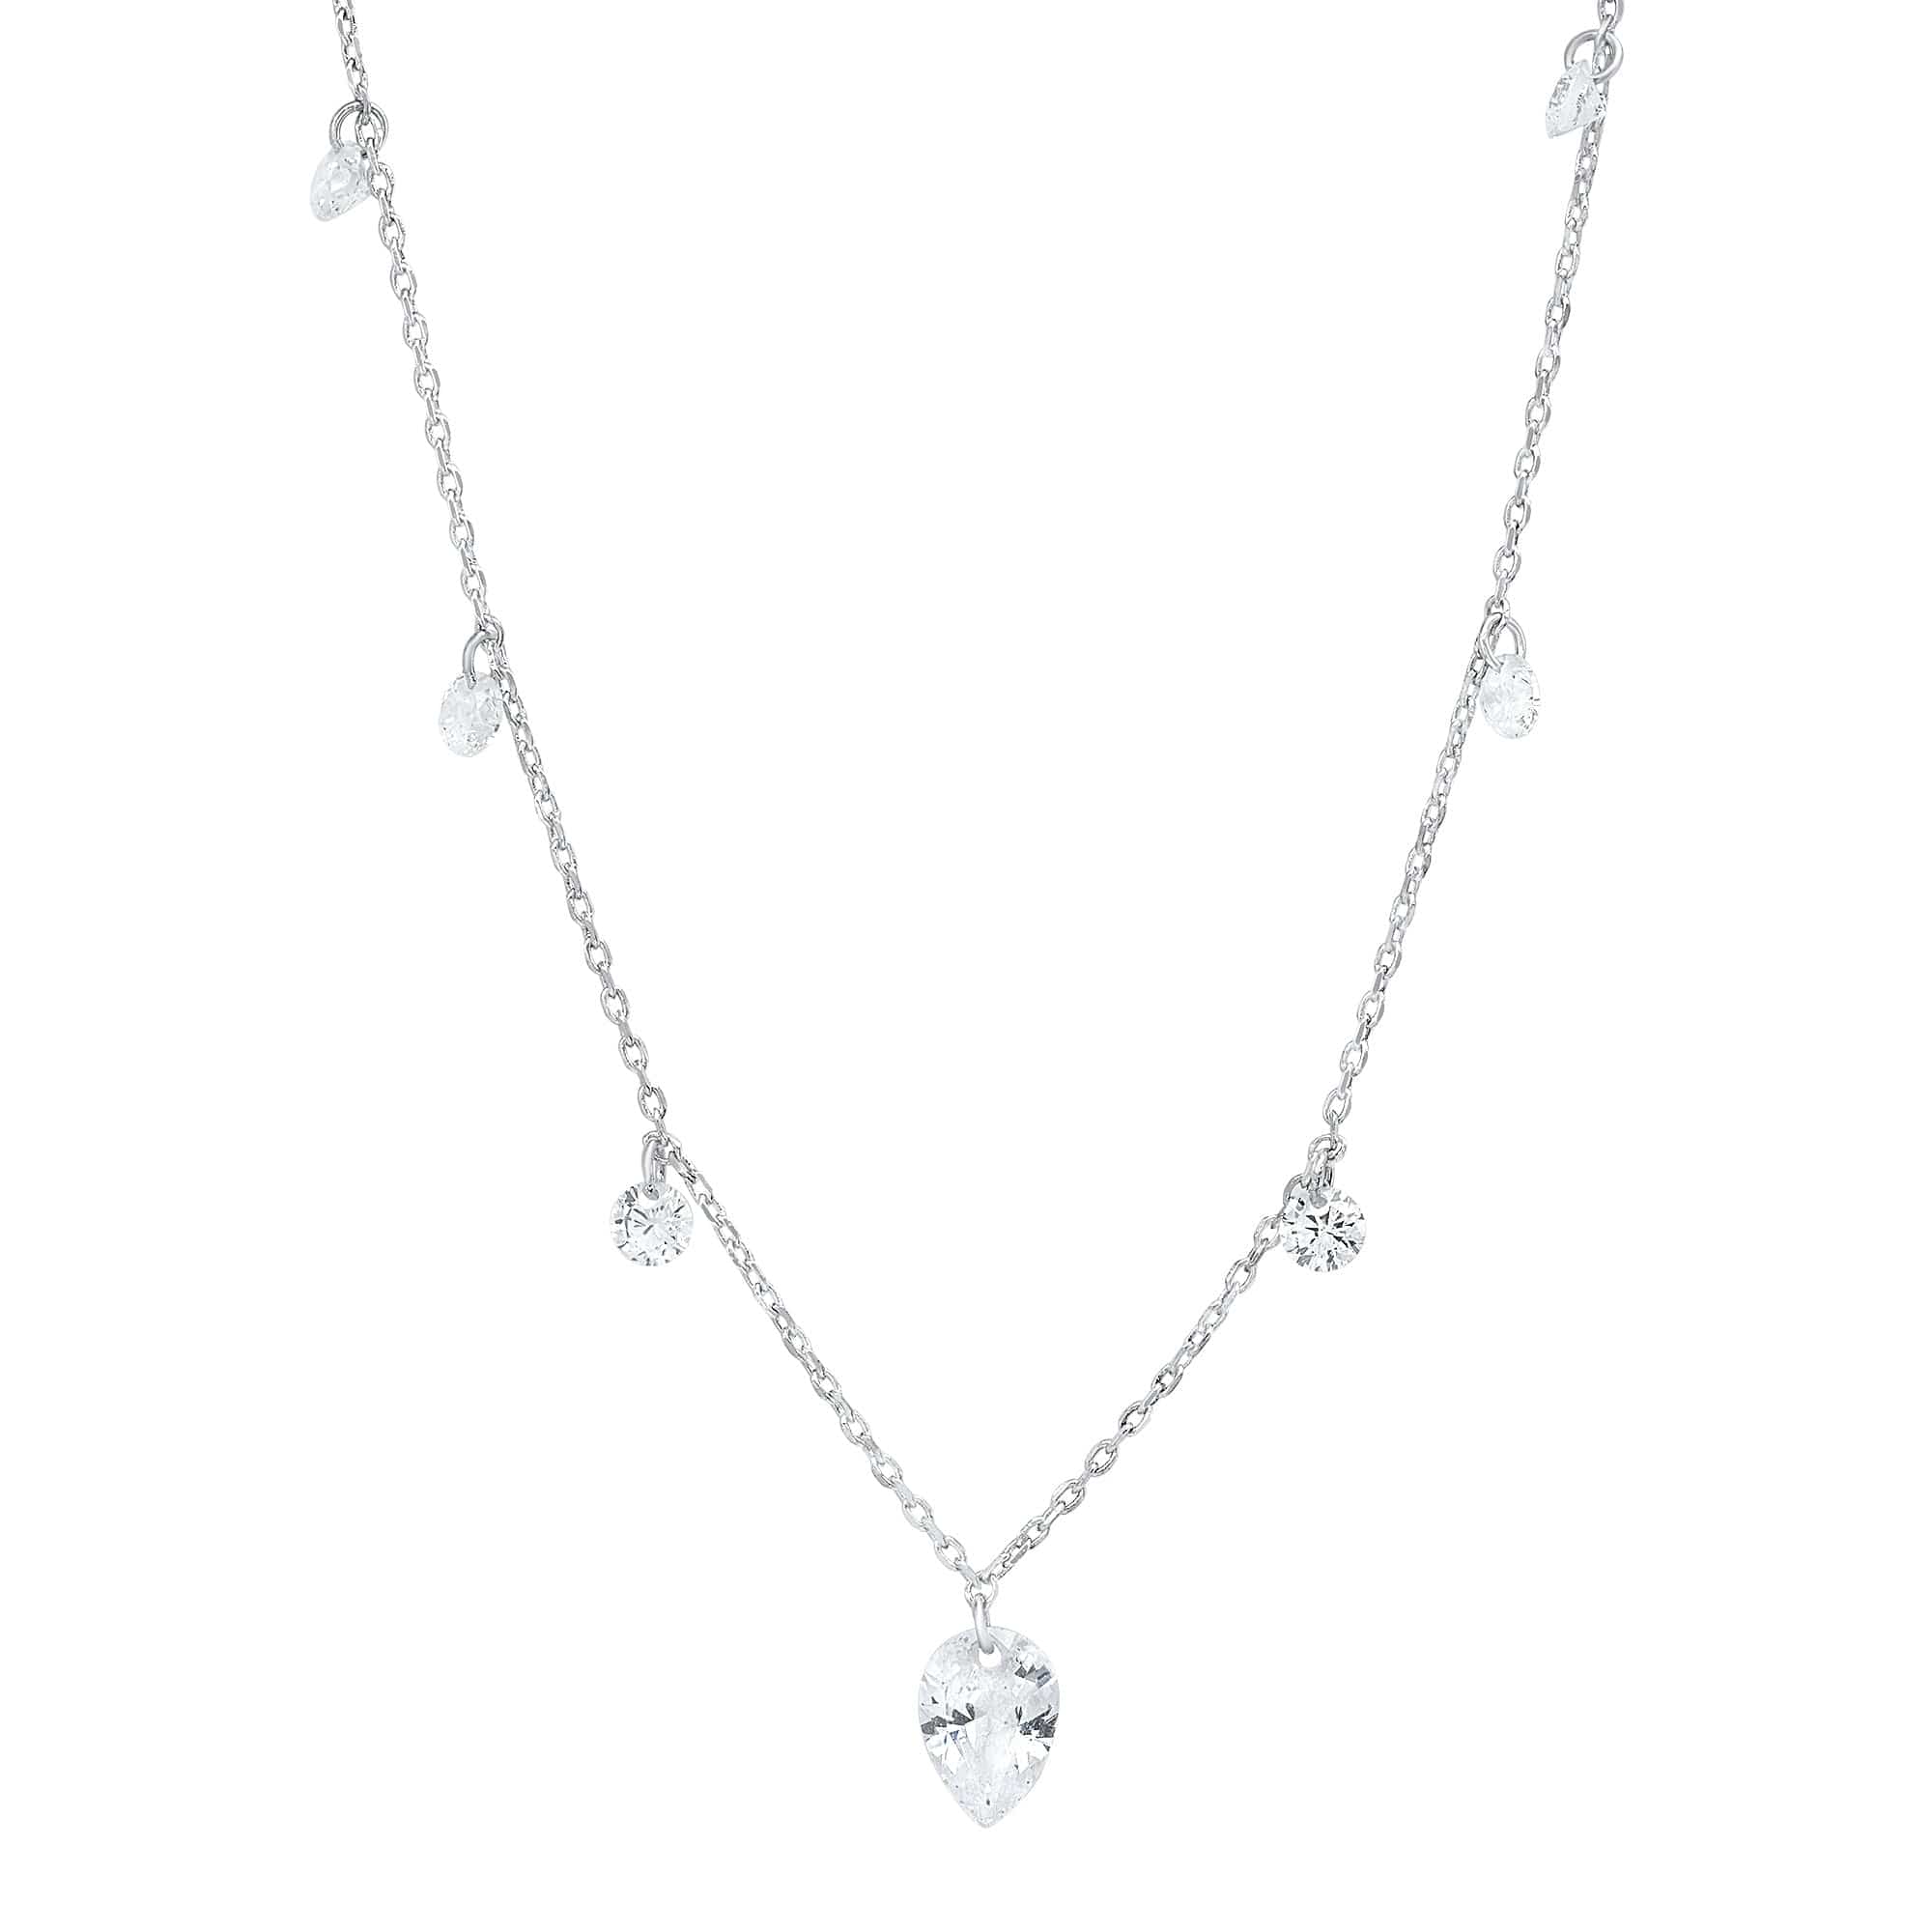 TAI JEWELRY Necklace Silver Floating Cz Station Necklace With Pear Shaped Cz Pendant